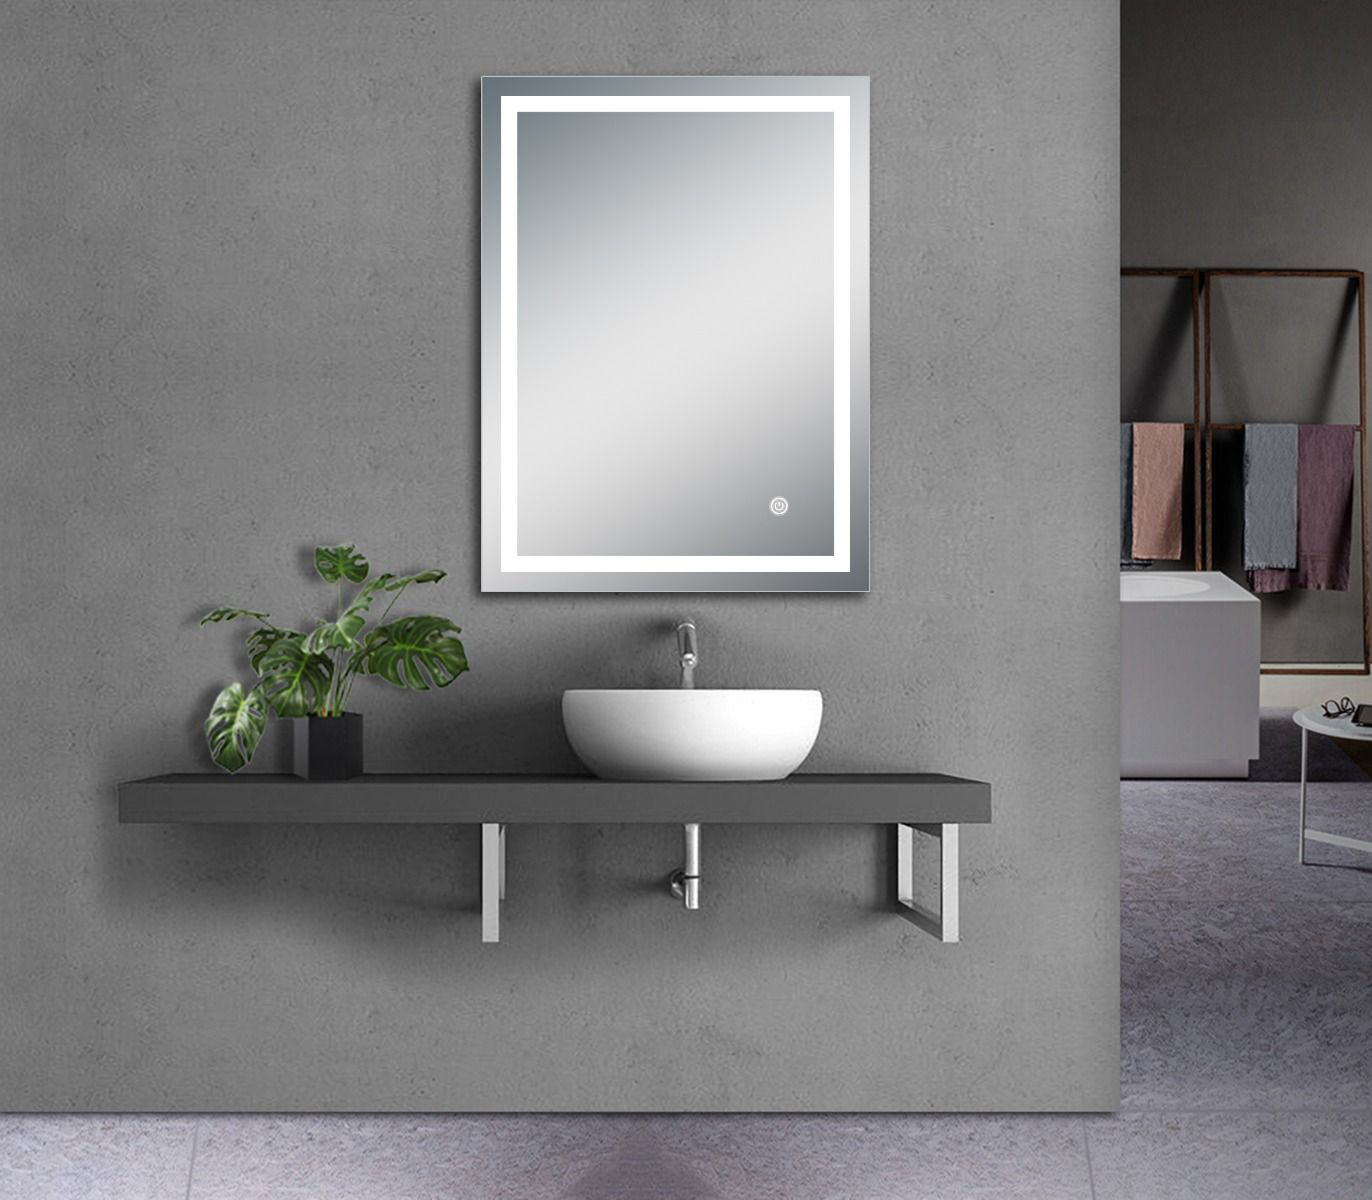 Riga LED Mirror with Dimmer and Defogger - Available in 4 Sizes